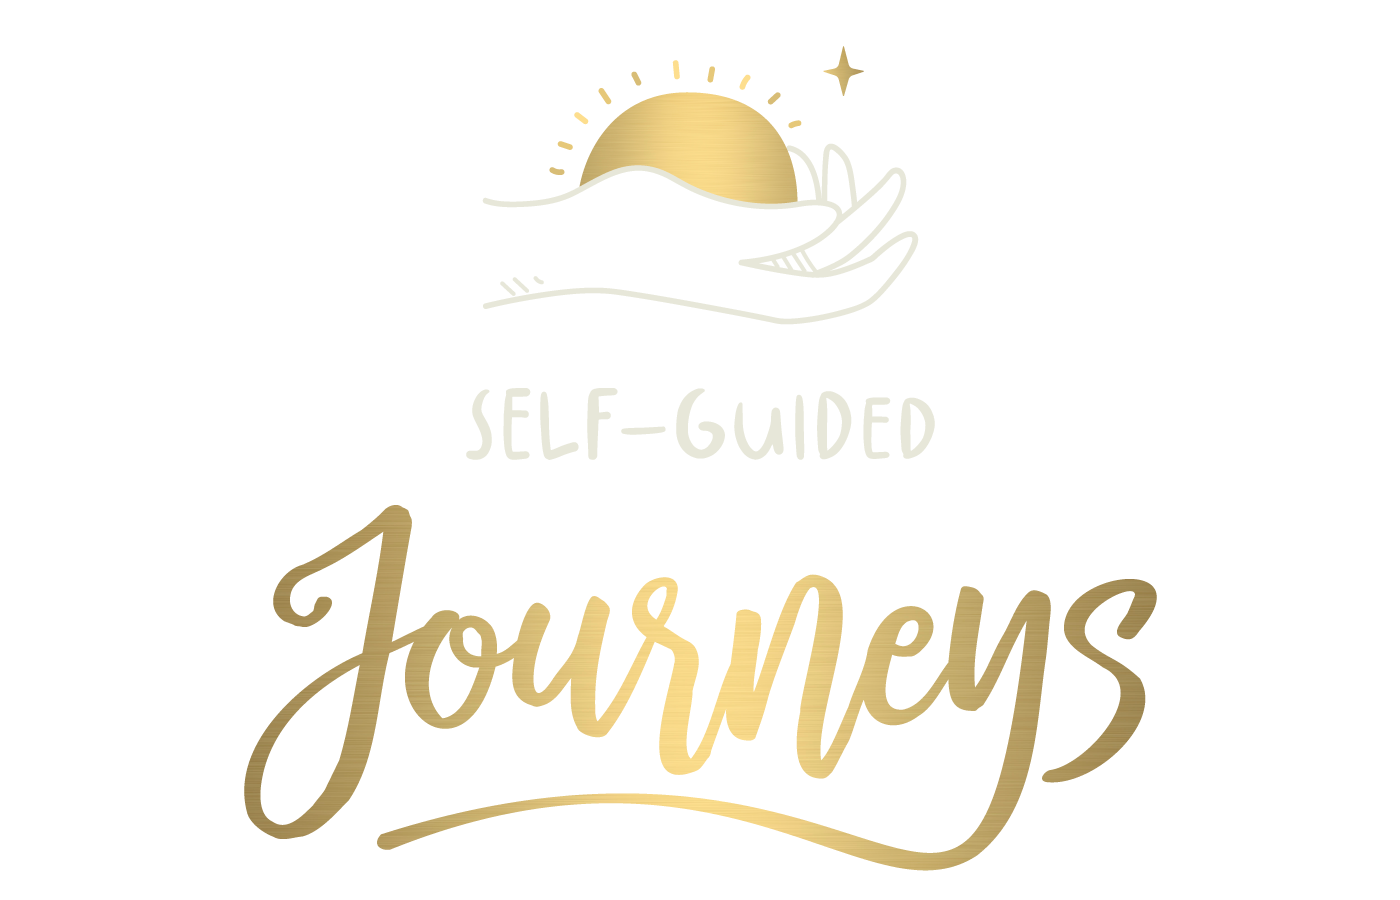 SELF-GUIDED JOURNEYS